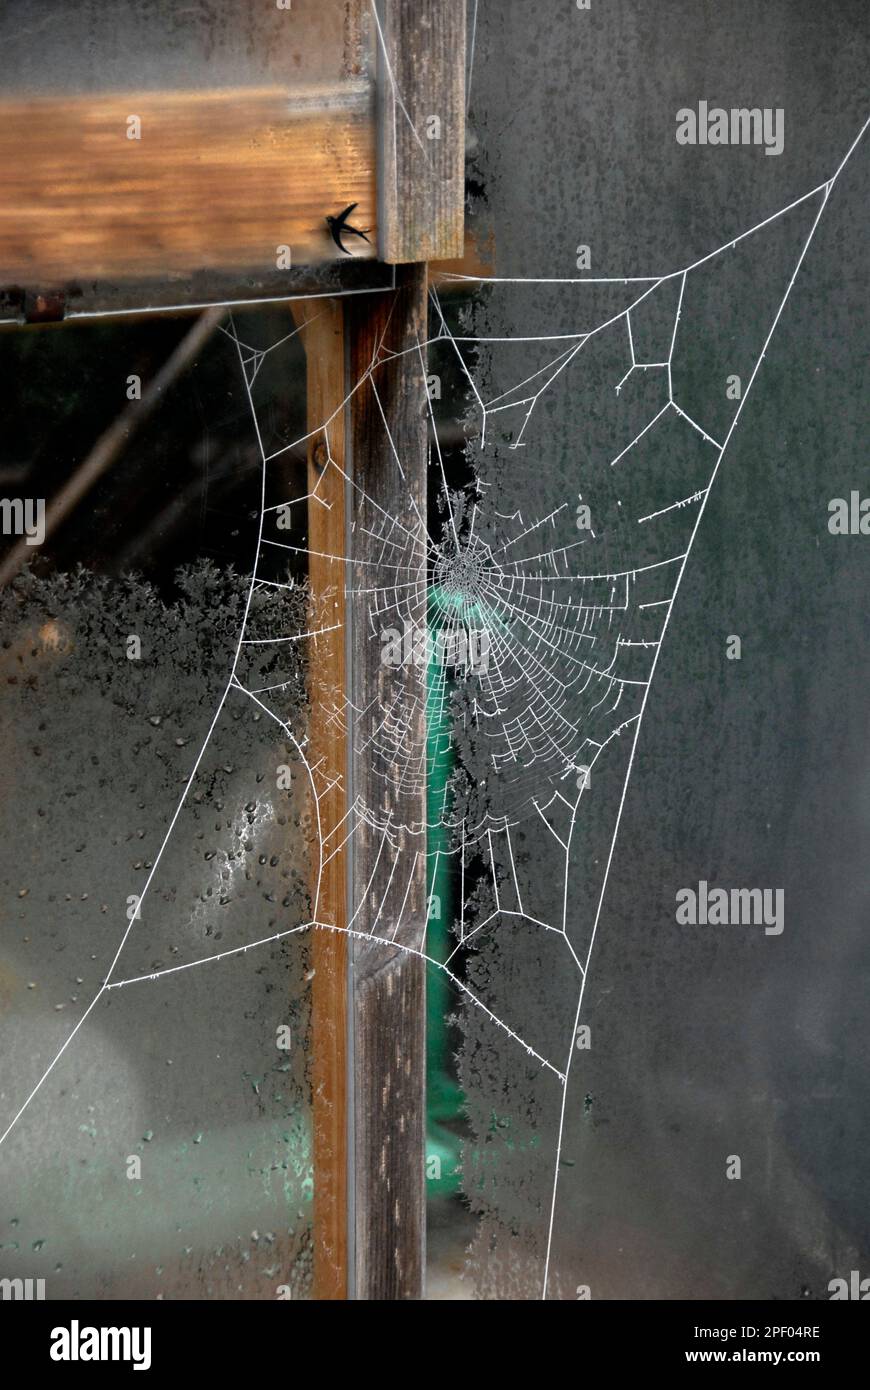 Spider's web on outside of greenhouse in frosty weather conditions Stock Photo